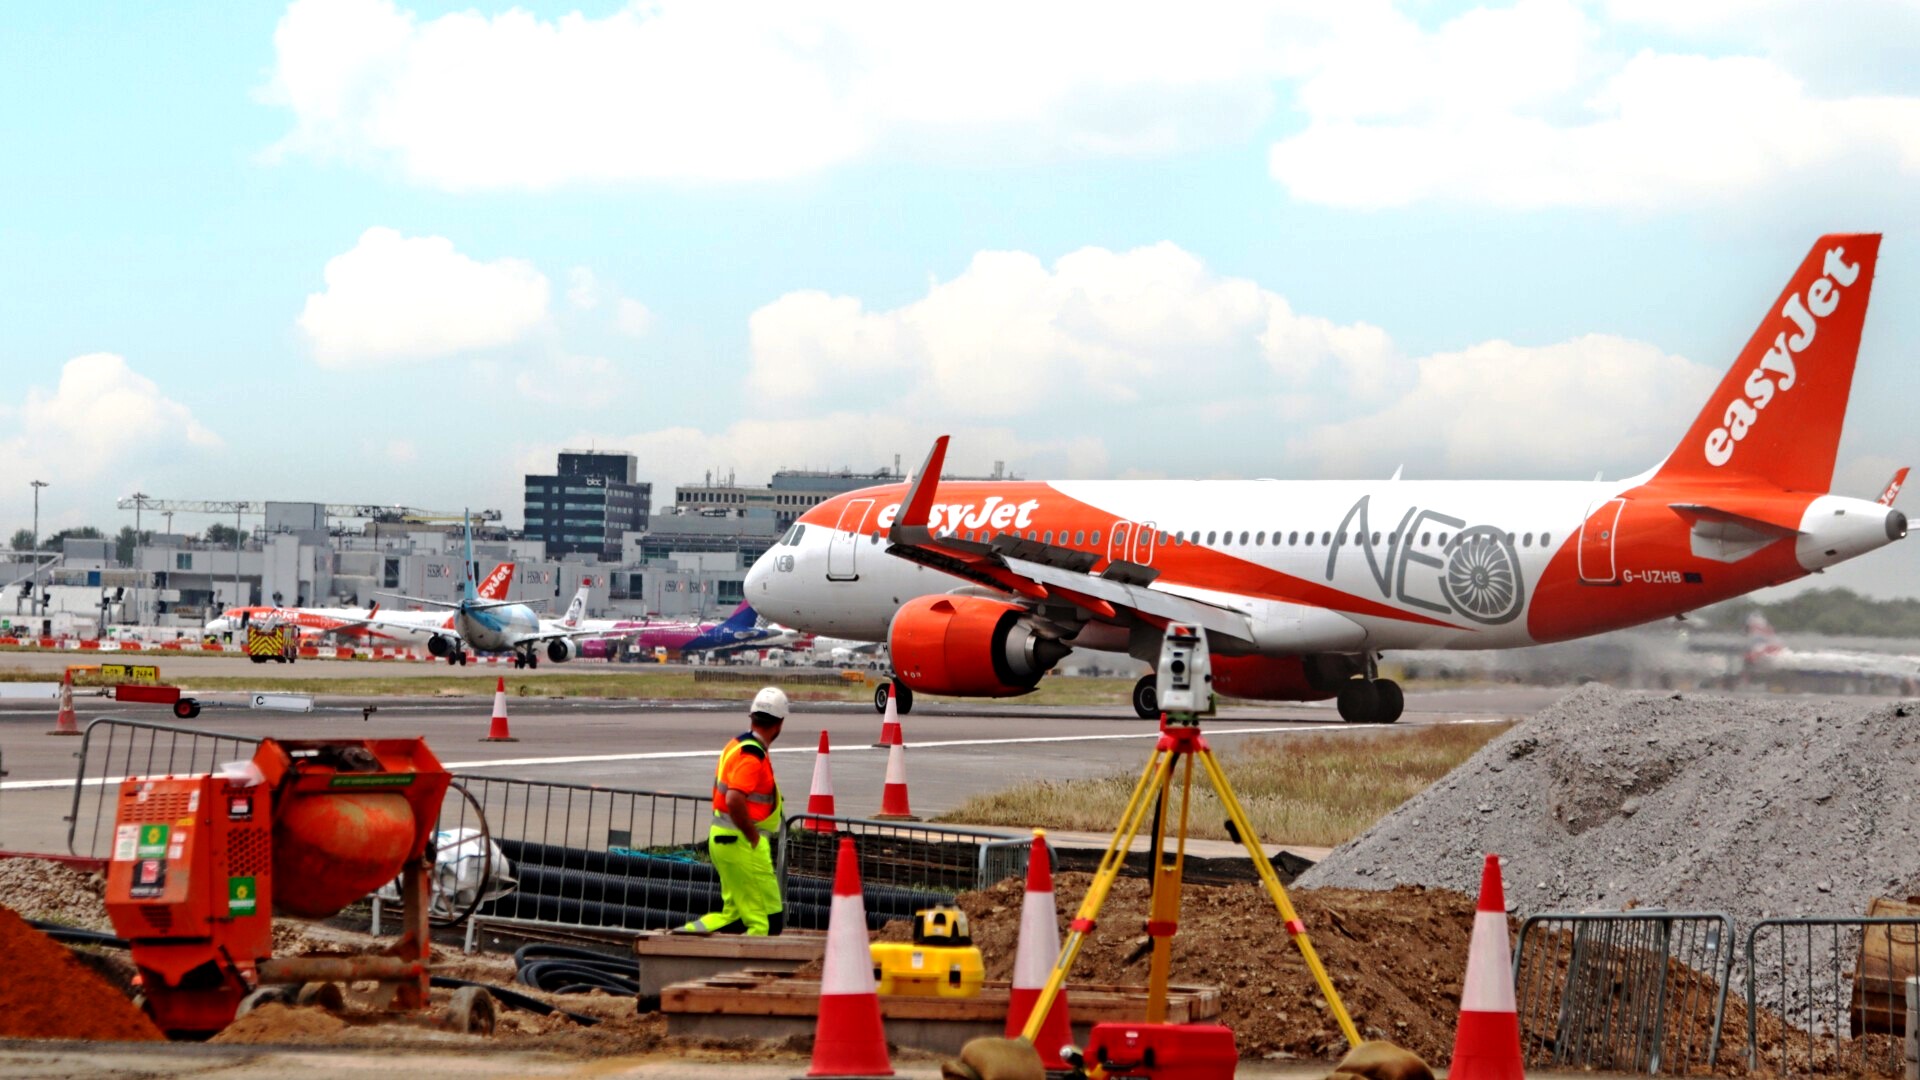 Gatwick taxiway helps reduce delays and aircraft emissions